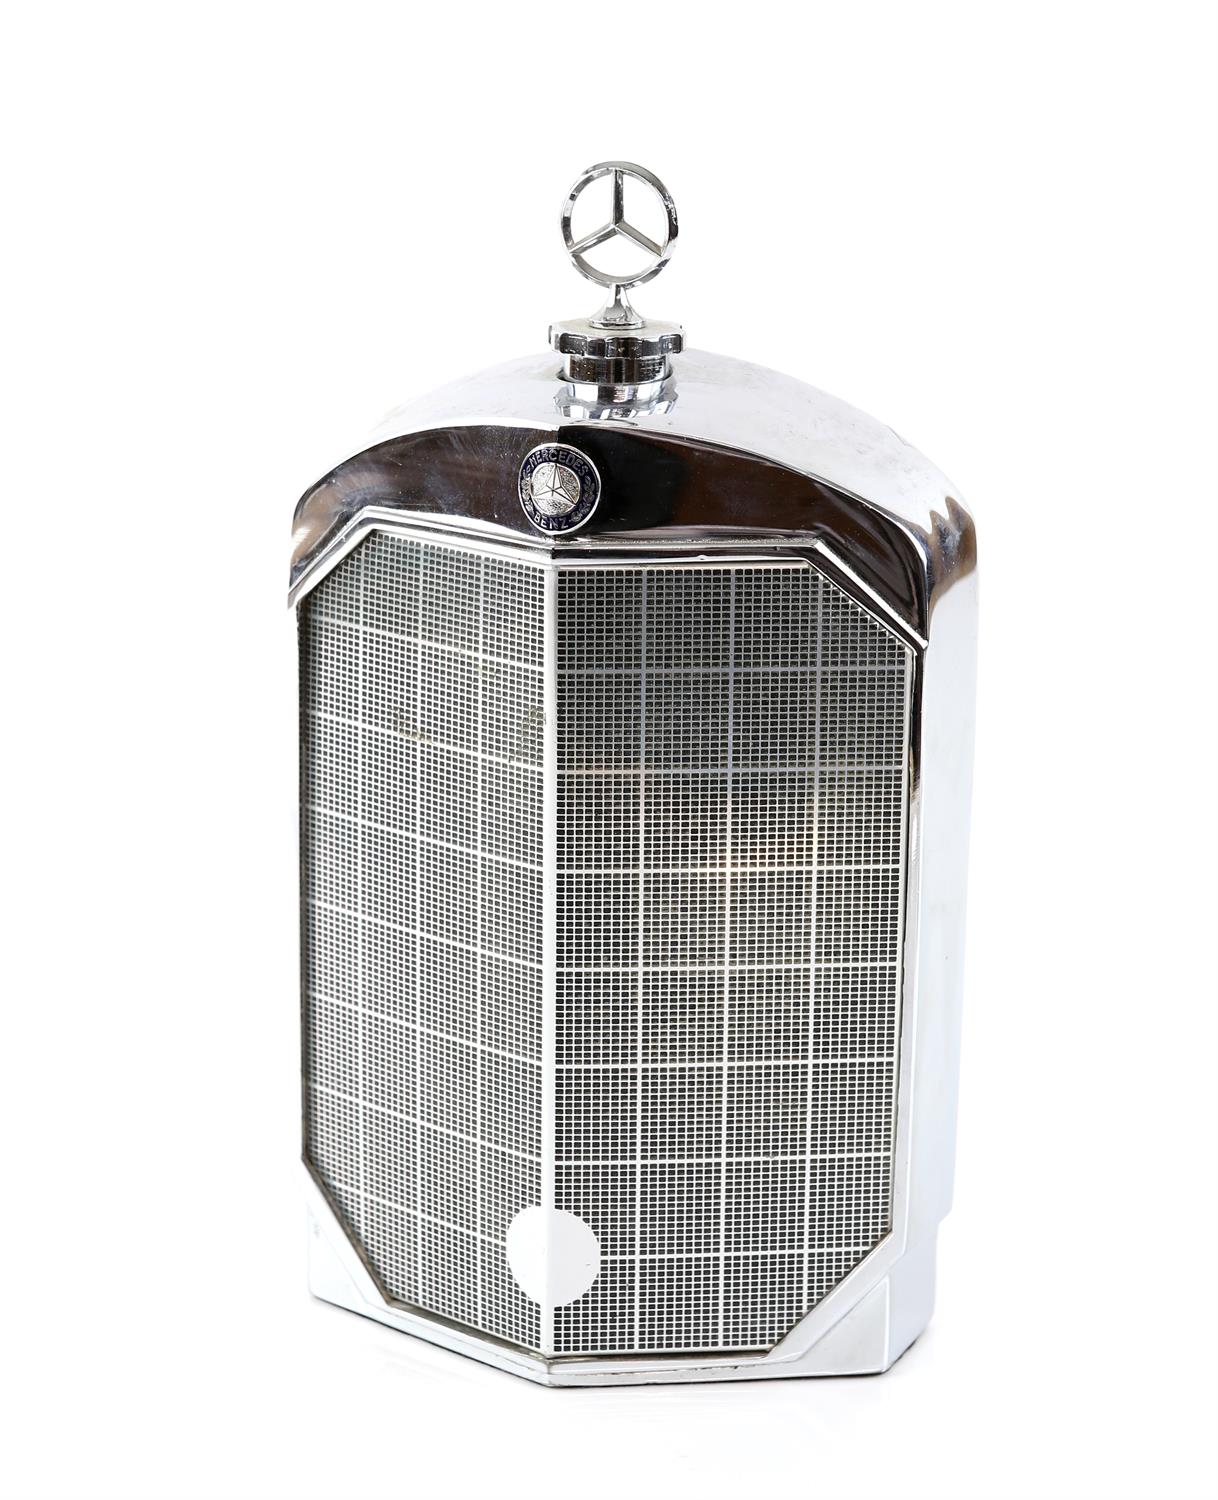 A unmarked chrome decanter in the form of Mercedes-Benz front radiator grill 22 x 12cm